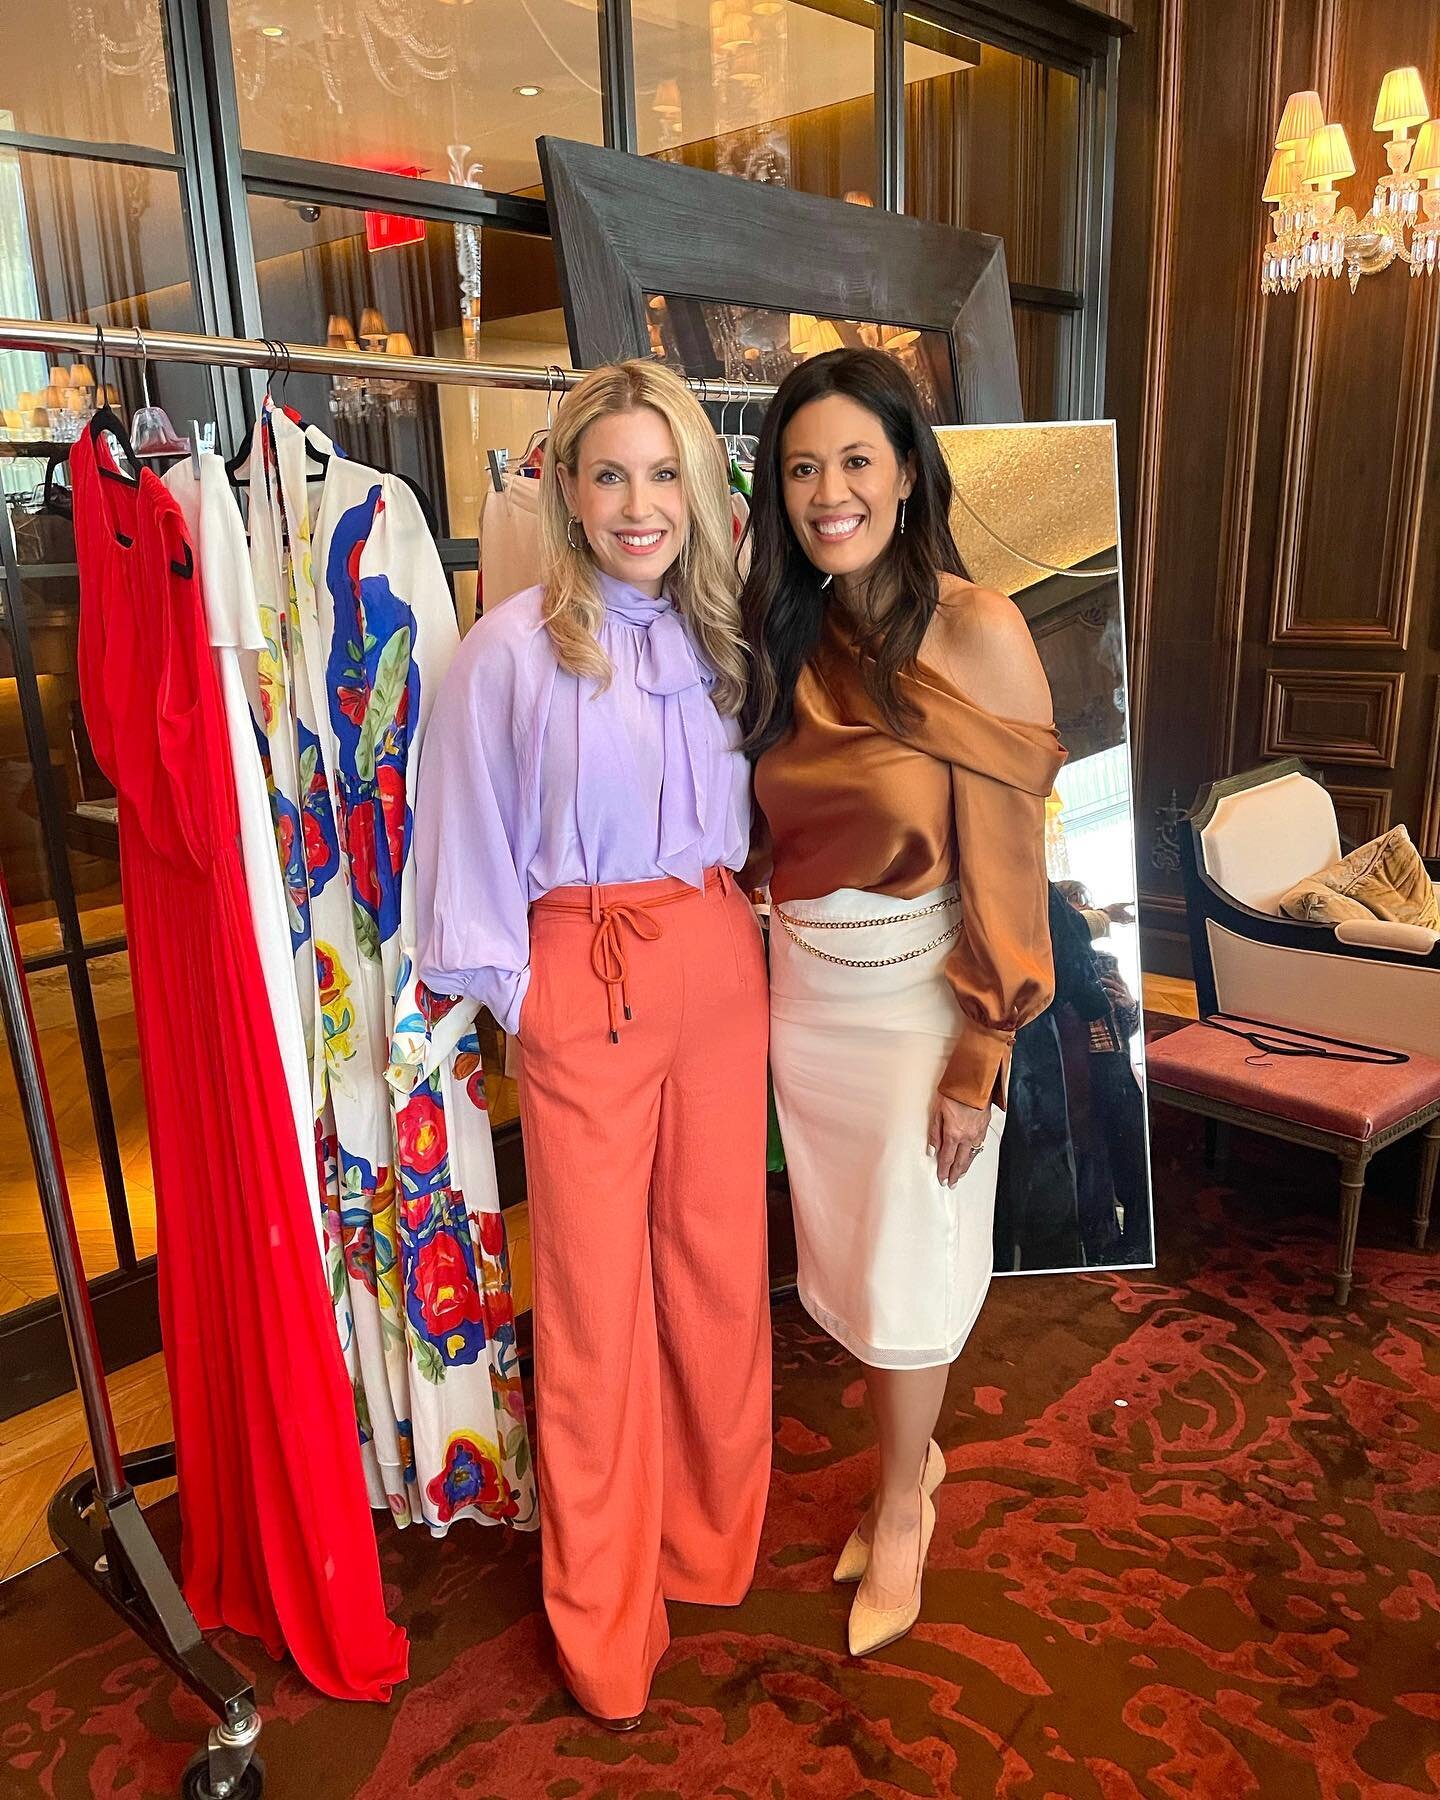 High tea + high fashion in the company of these incredible individuals! Thank you to my beautiful friend and #bossbabe Stylist @samanthabrownstyle + @caresteofficial for hosting this lovely, exclusive and intimate event at the @baccarat NYC. It&rsquo